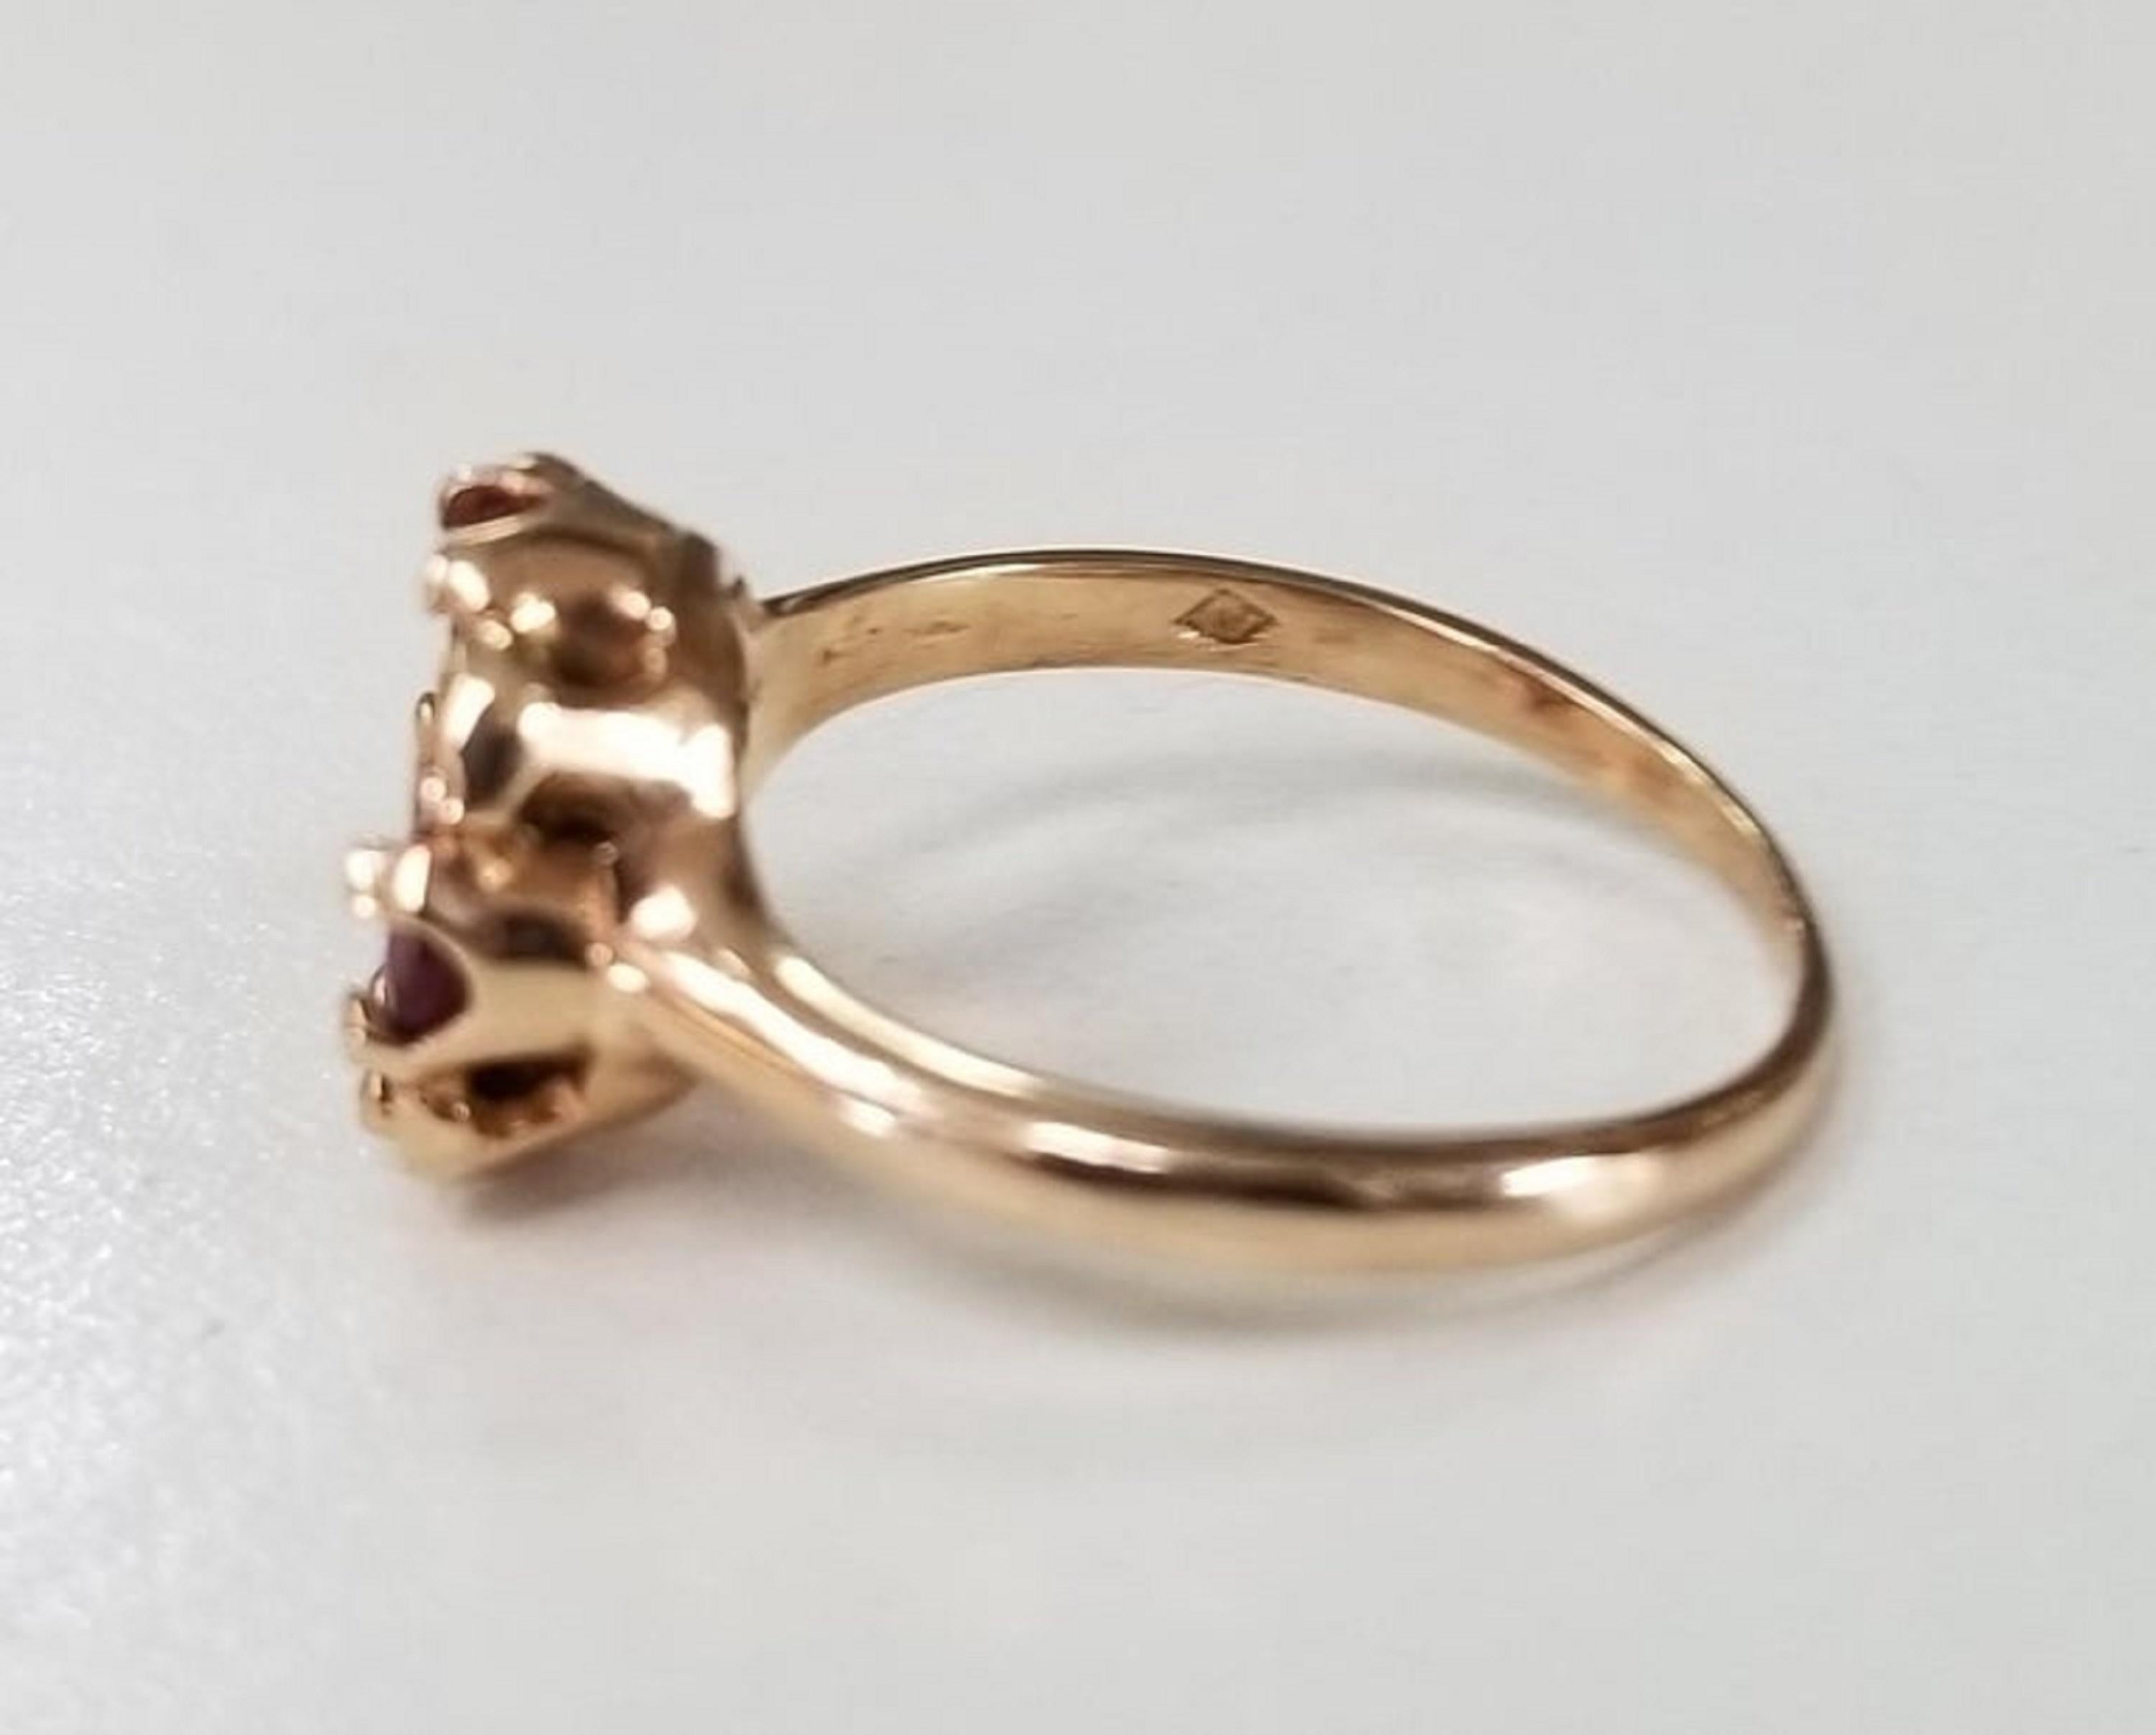 14k rose gold ruby and diamond ring, containing 4 round cut ruby of fine quality weighing .90pts. and 5 round full cut diamonds of very fine quality weighing .13pts. in an 